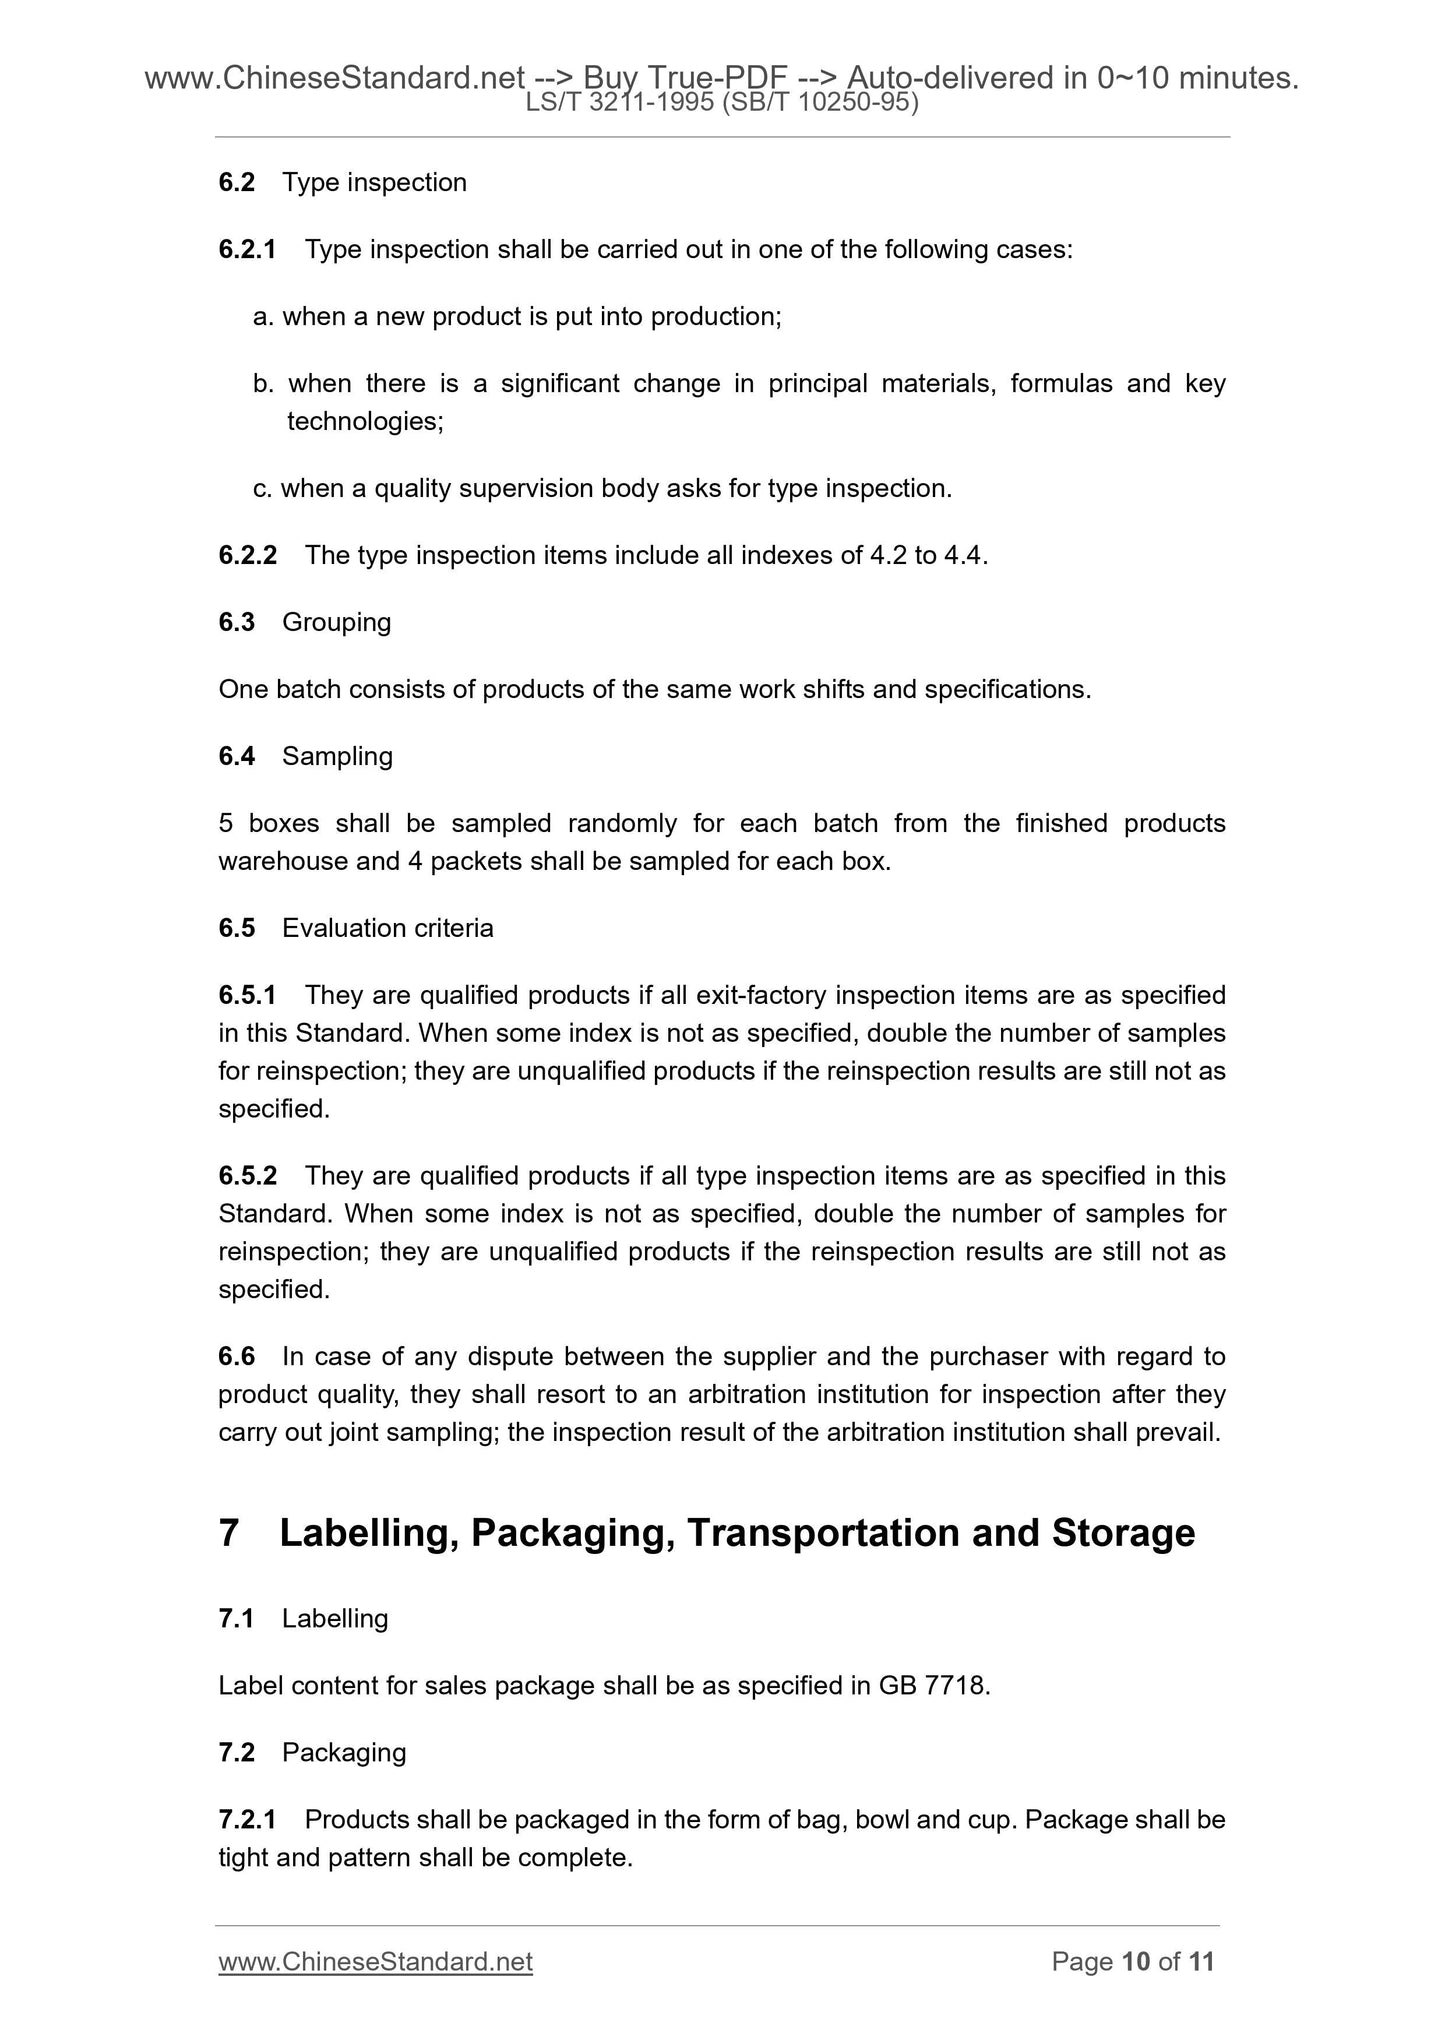 LS/T 3211-1995 Page 6